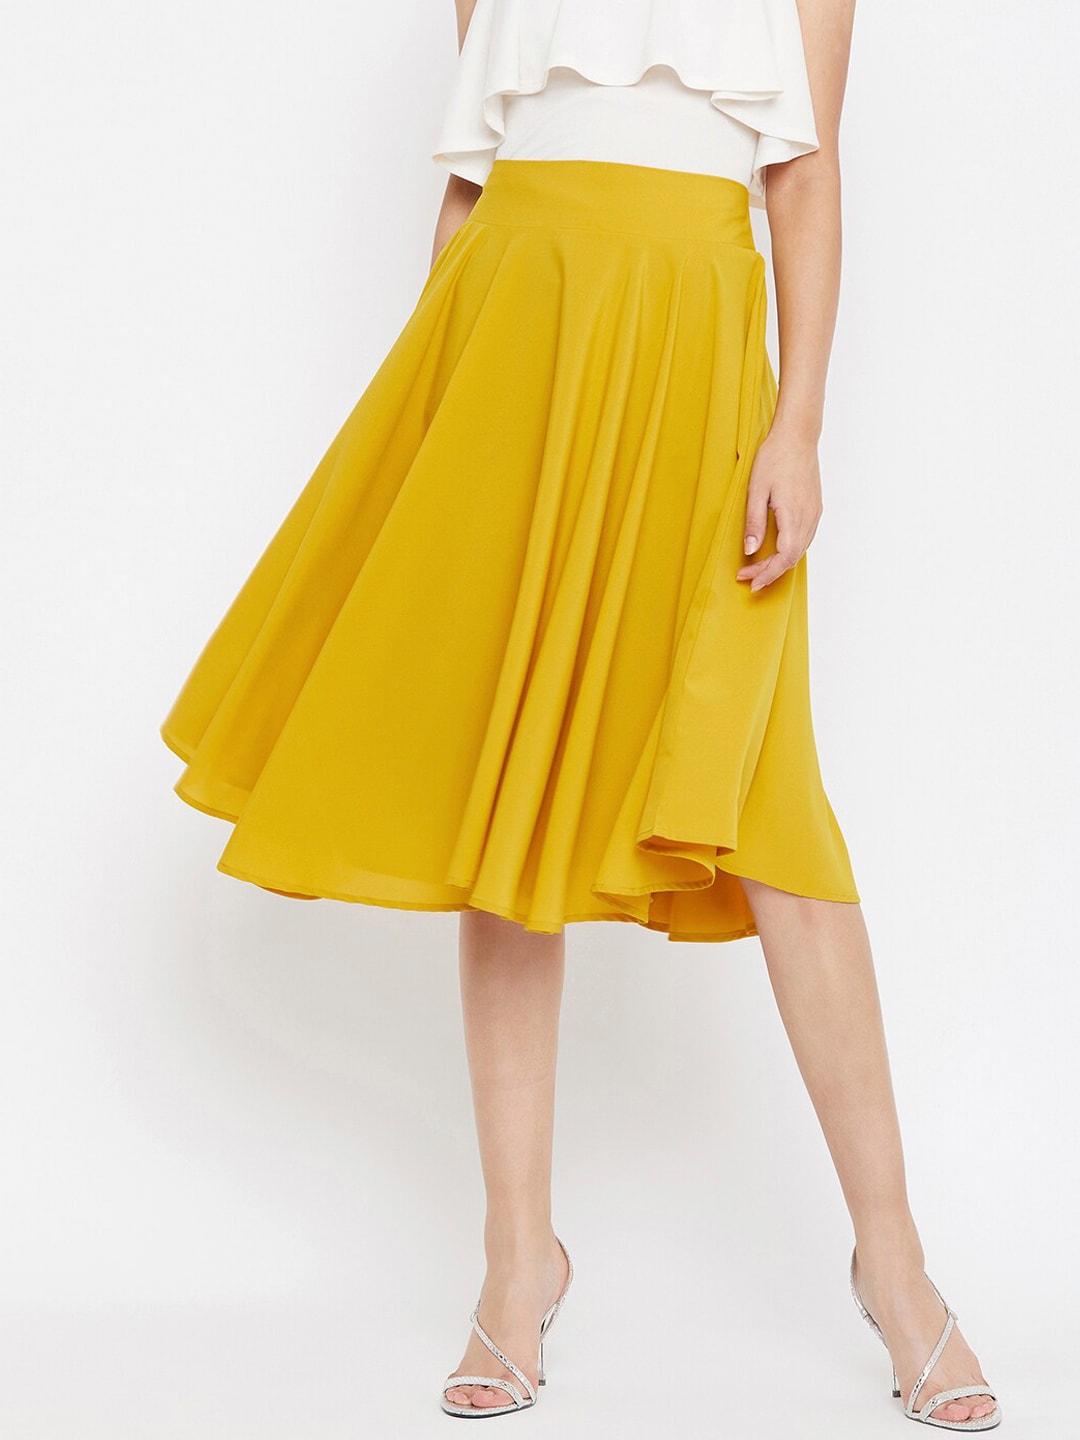 Berrylush Mustard Yellow Pleated Flared A-Line Skirt Price in India